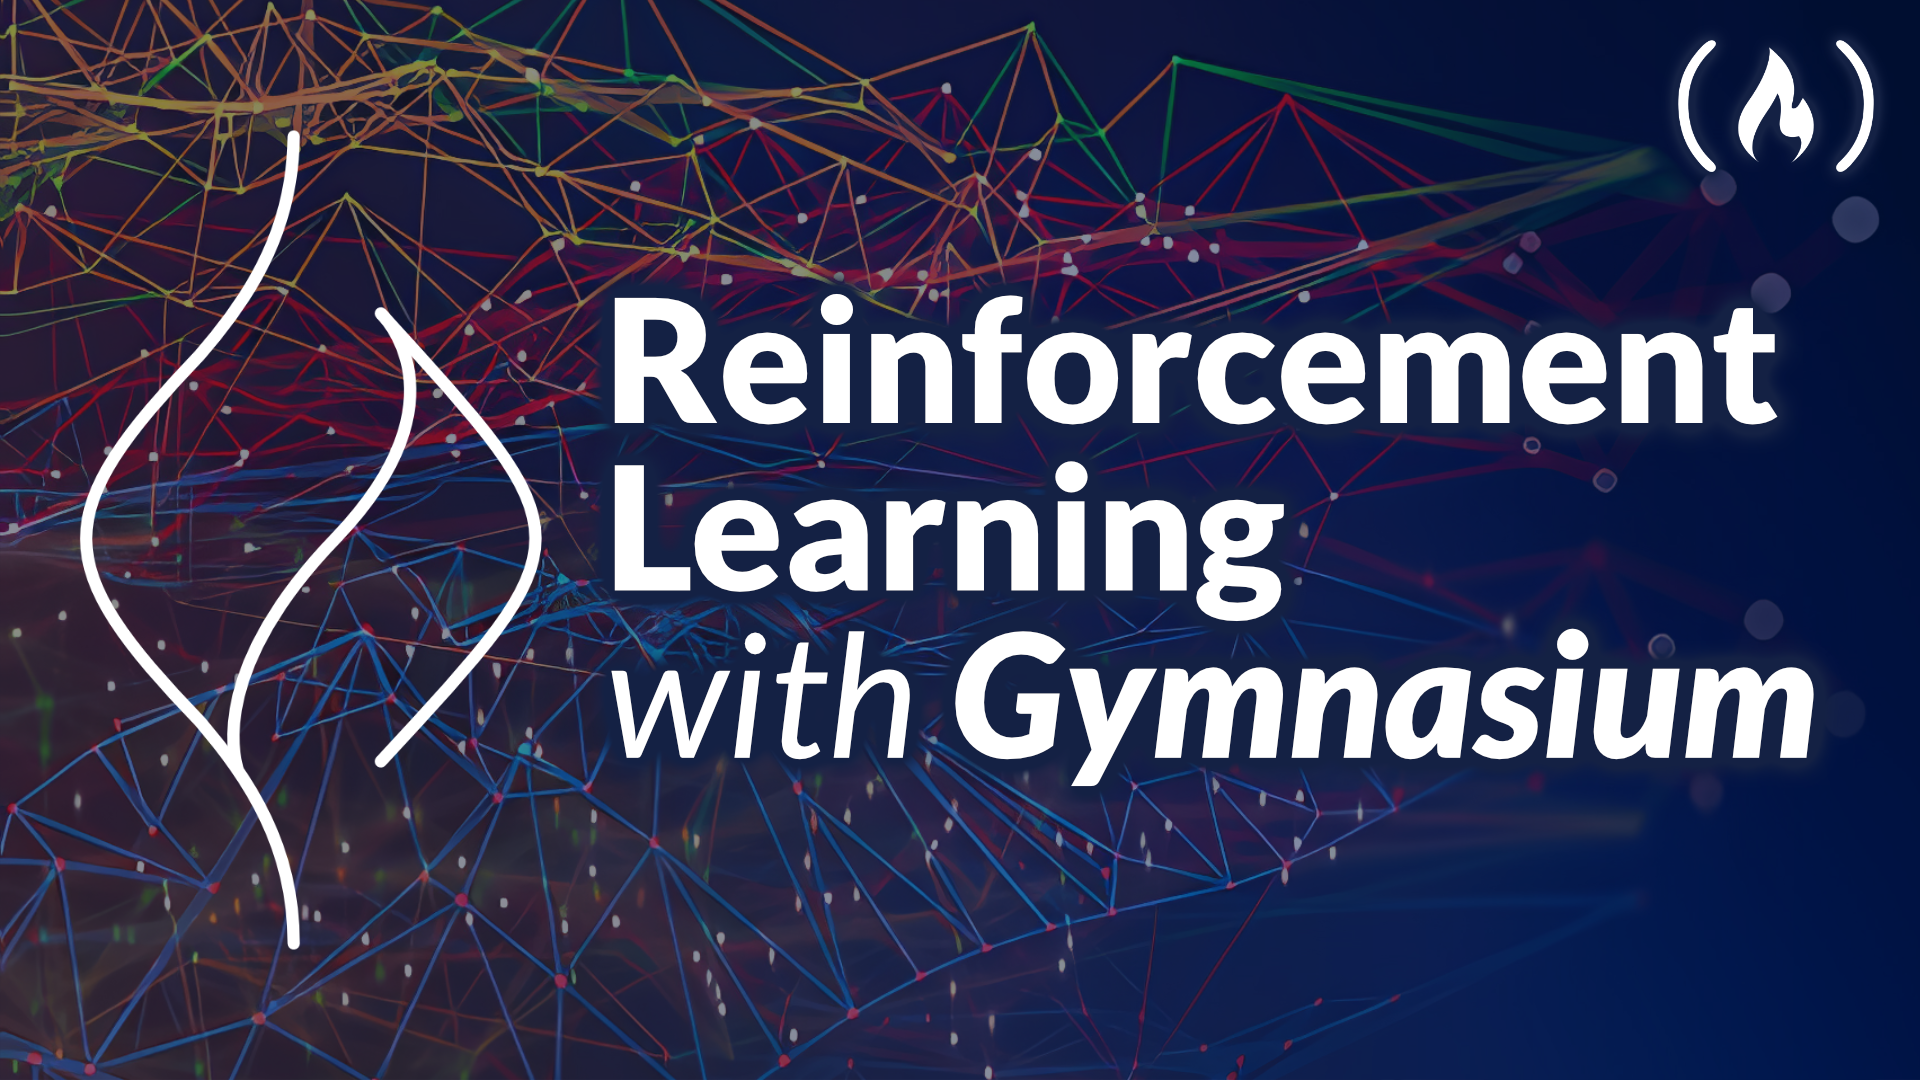 Use Gymnasium for Reinforcement Learning